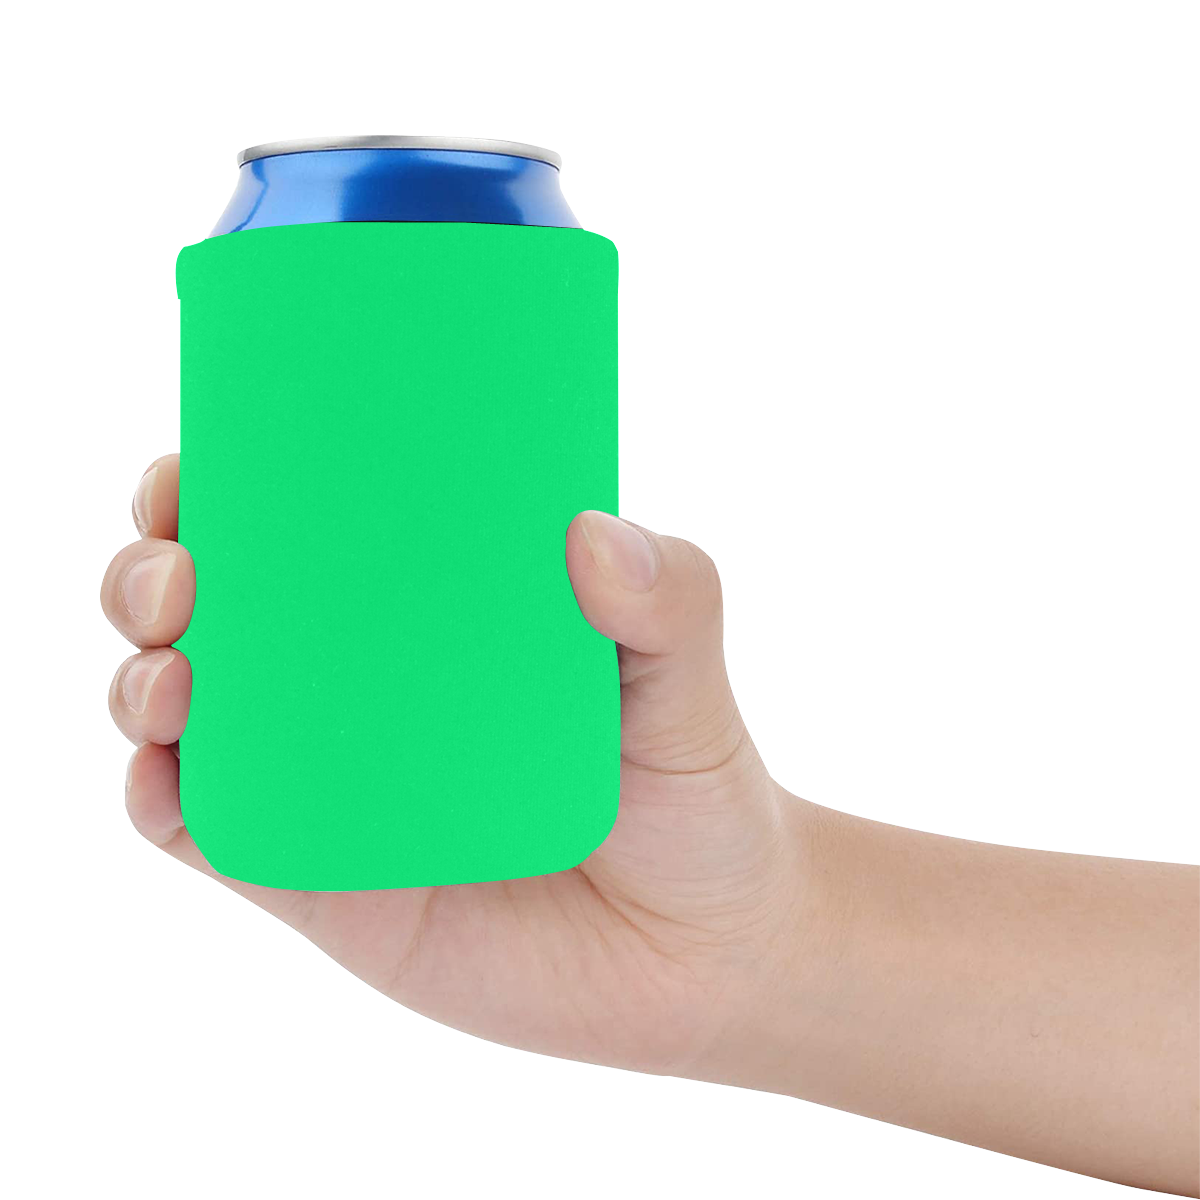 color spring green Neoprene Can Cooler 4" x 2.7" dia.